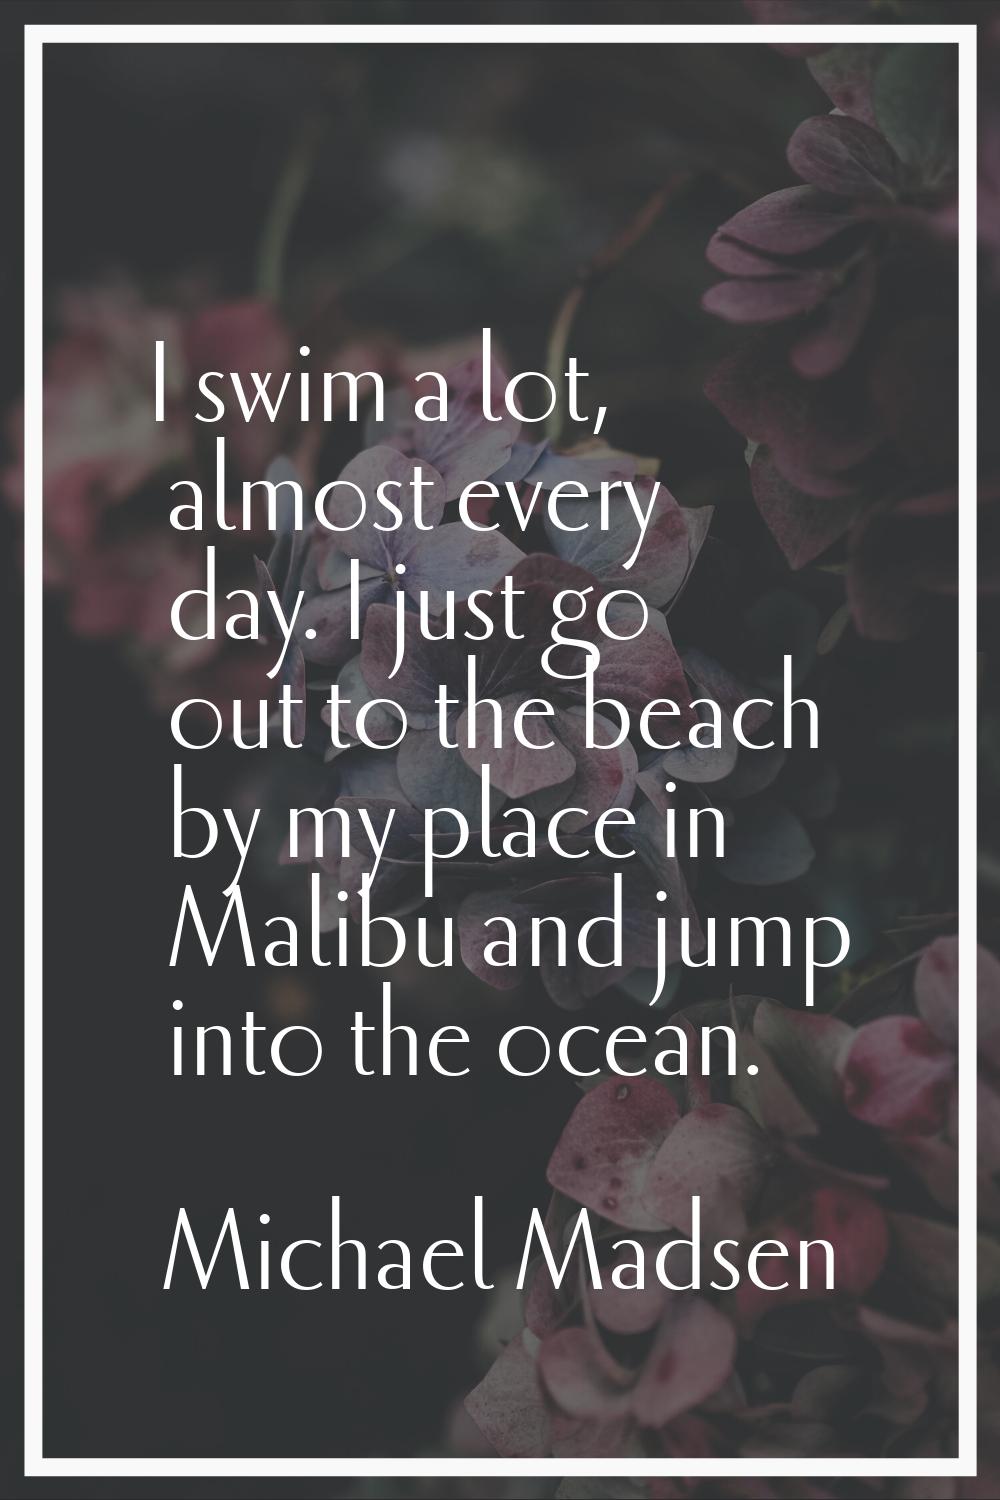 I swim a lot, almost every day. I just go out to the beach by my place in Malibu and jump into the 